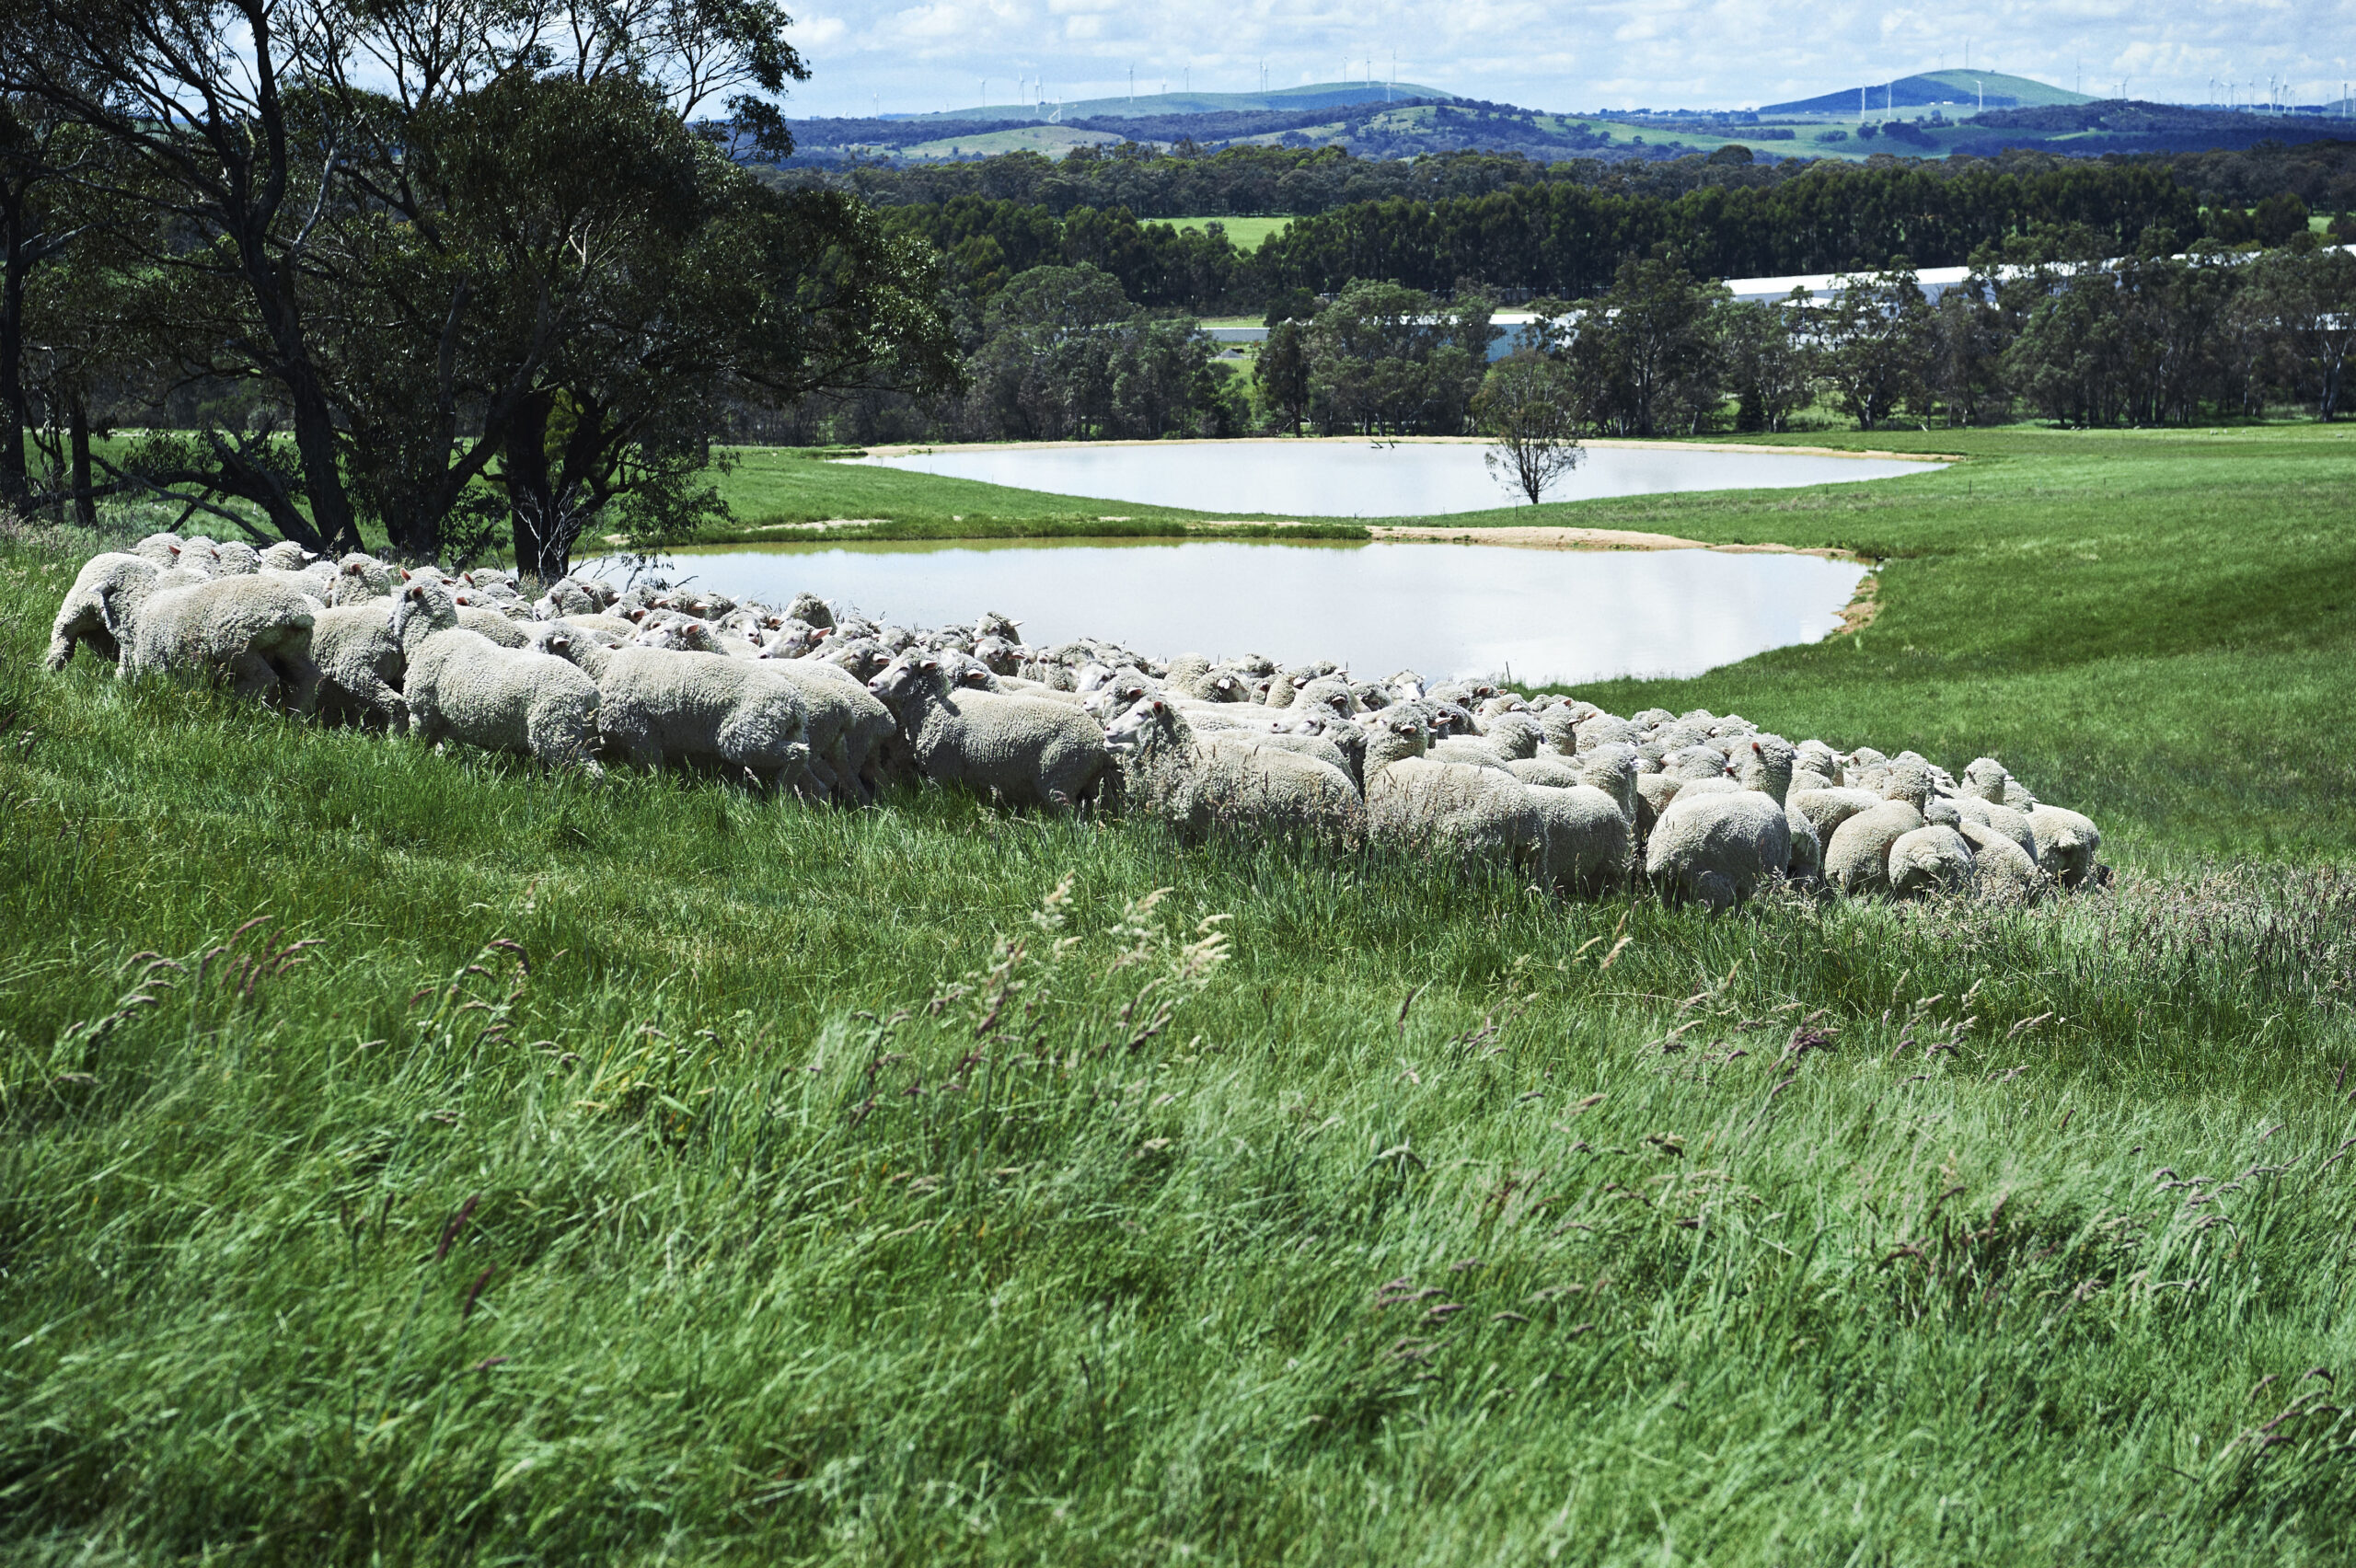 A flock of sheep grazing on a lush green pasture, with a serene pond in the background, set against a picturesque rural landscape.